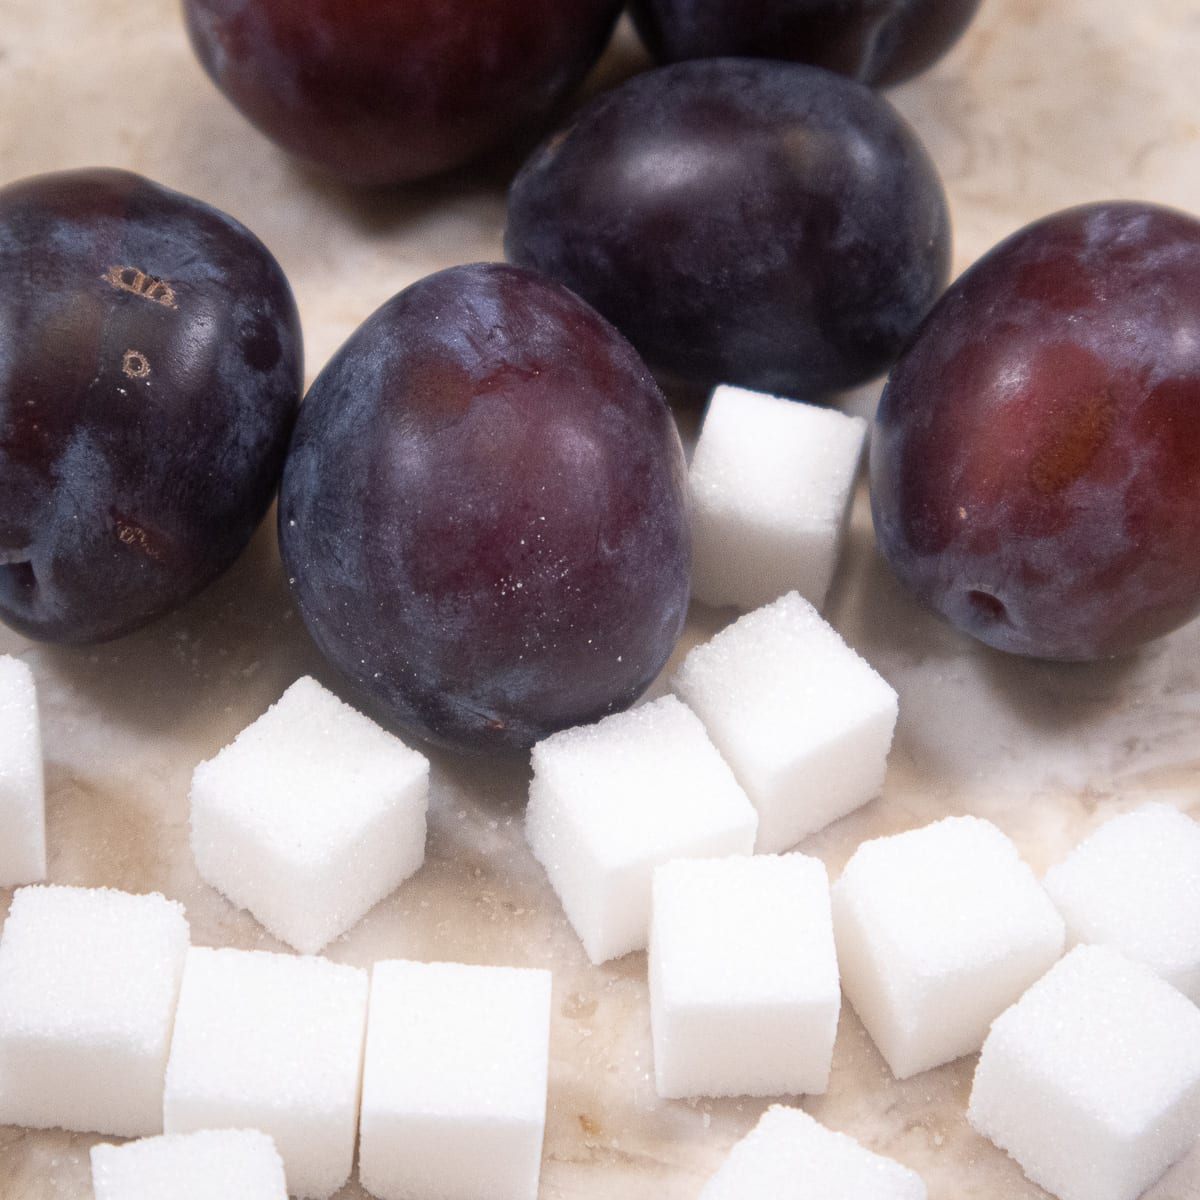 Plums and sugar cubes